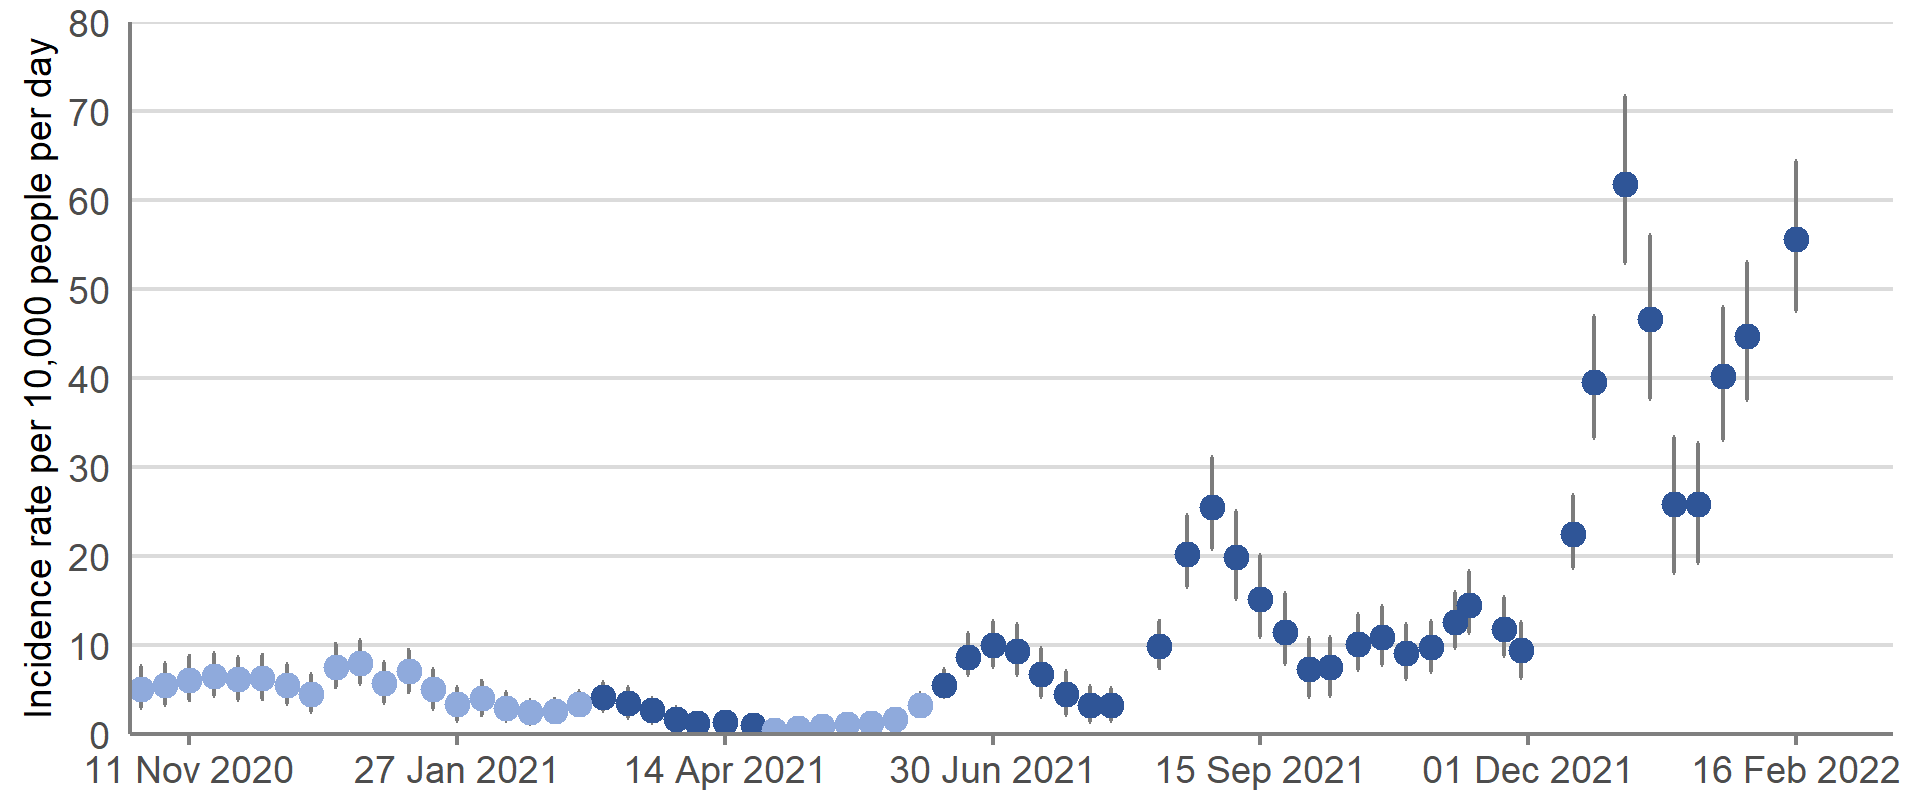 The official reported/indicative estimates of incidence rates in Scotland reached the highest peak since the start of the pandemic in the week 26 December 2021 to 1 January 2022. The incidence rate then decreased in the two weeks to 15 January 2022, before increasing again in recent weeks.